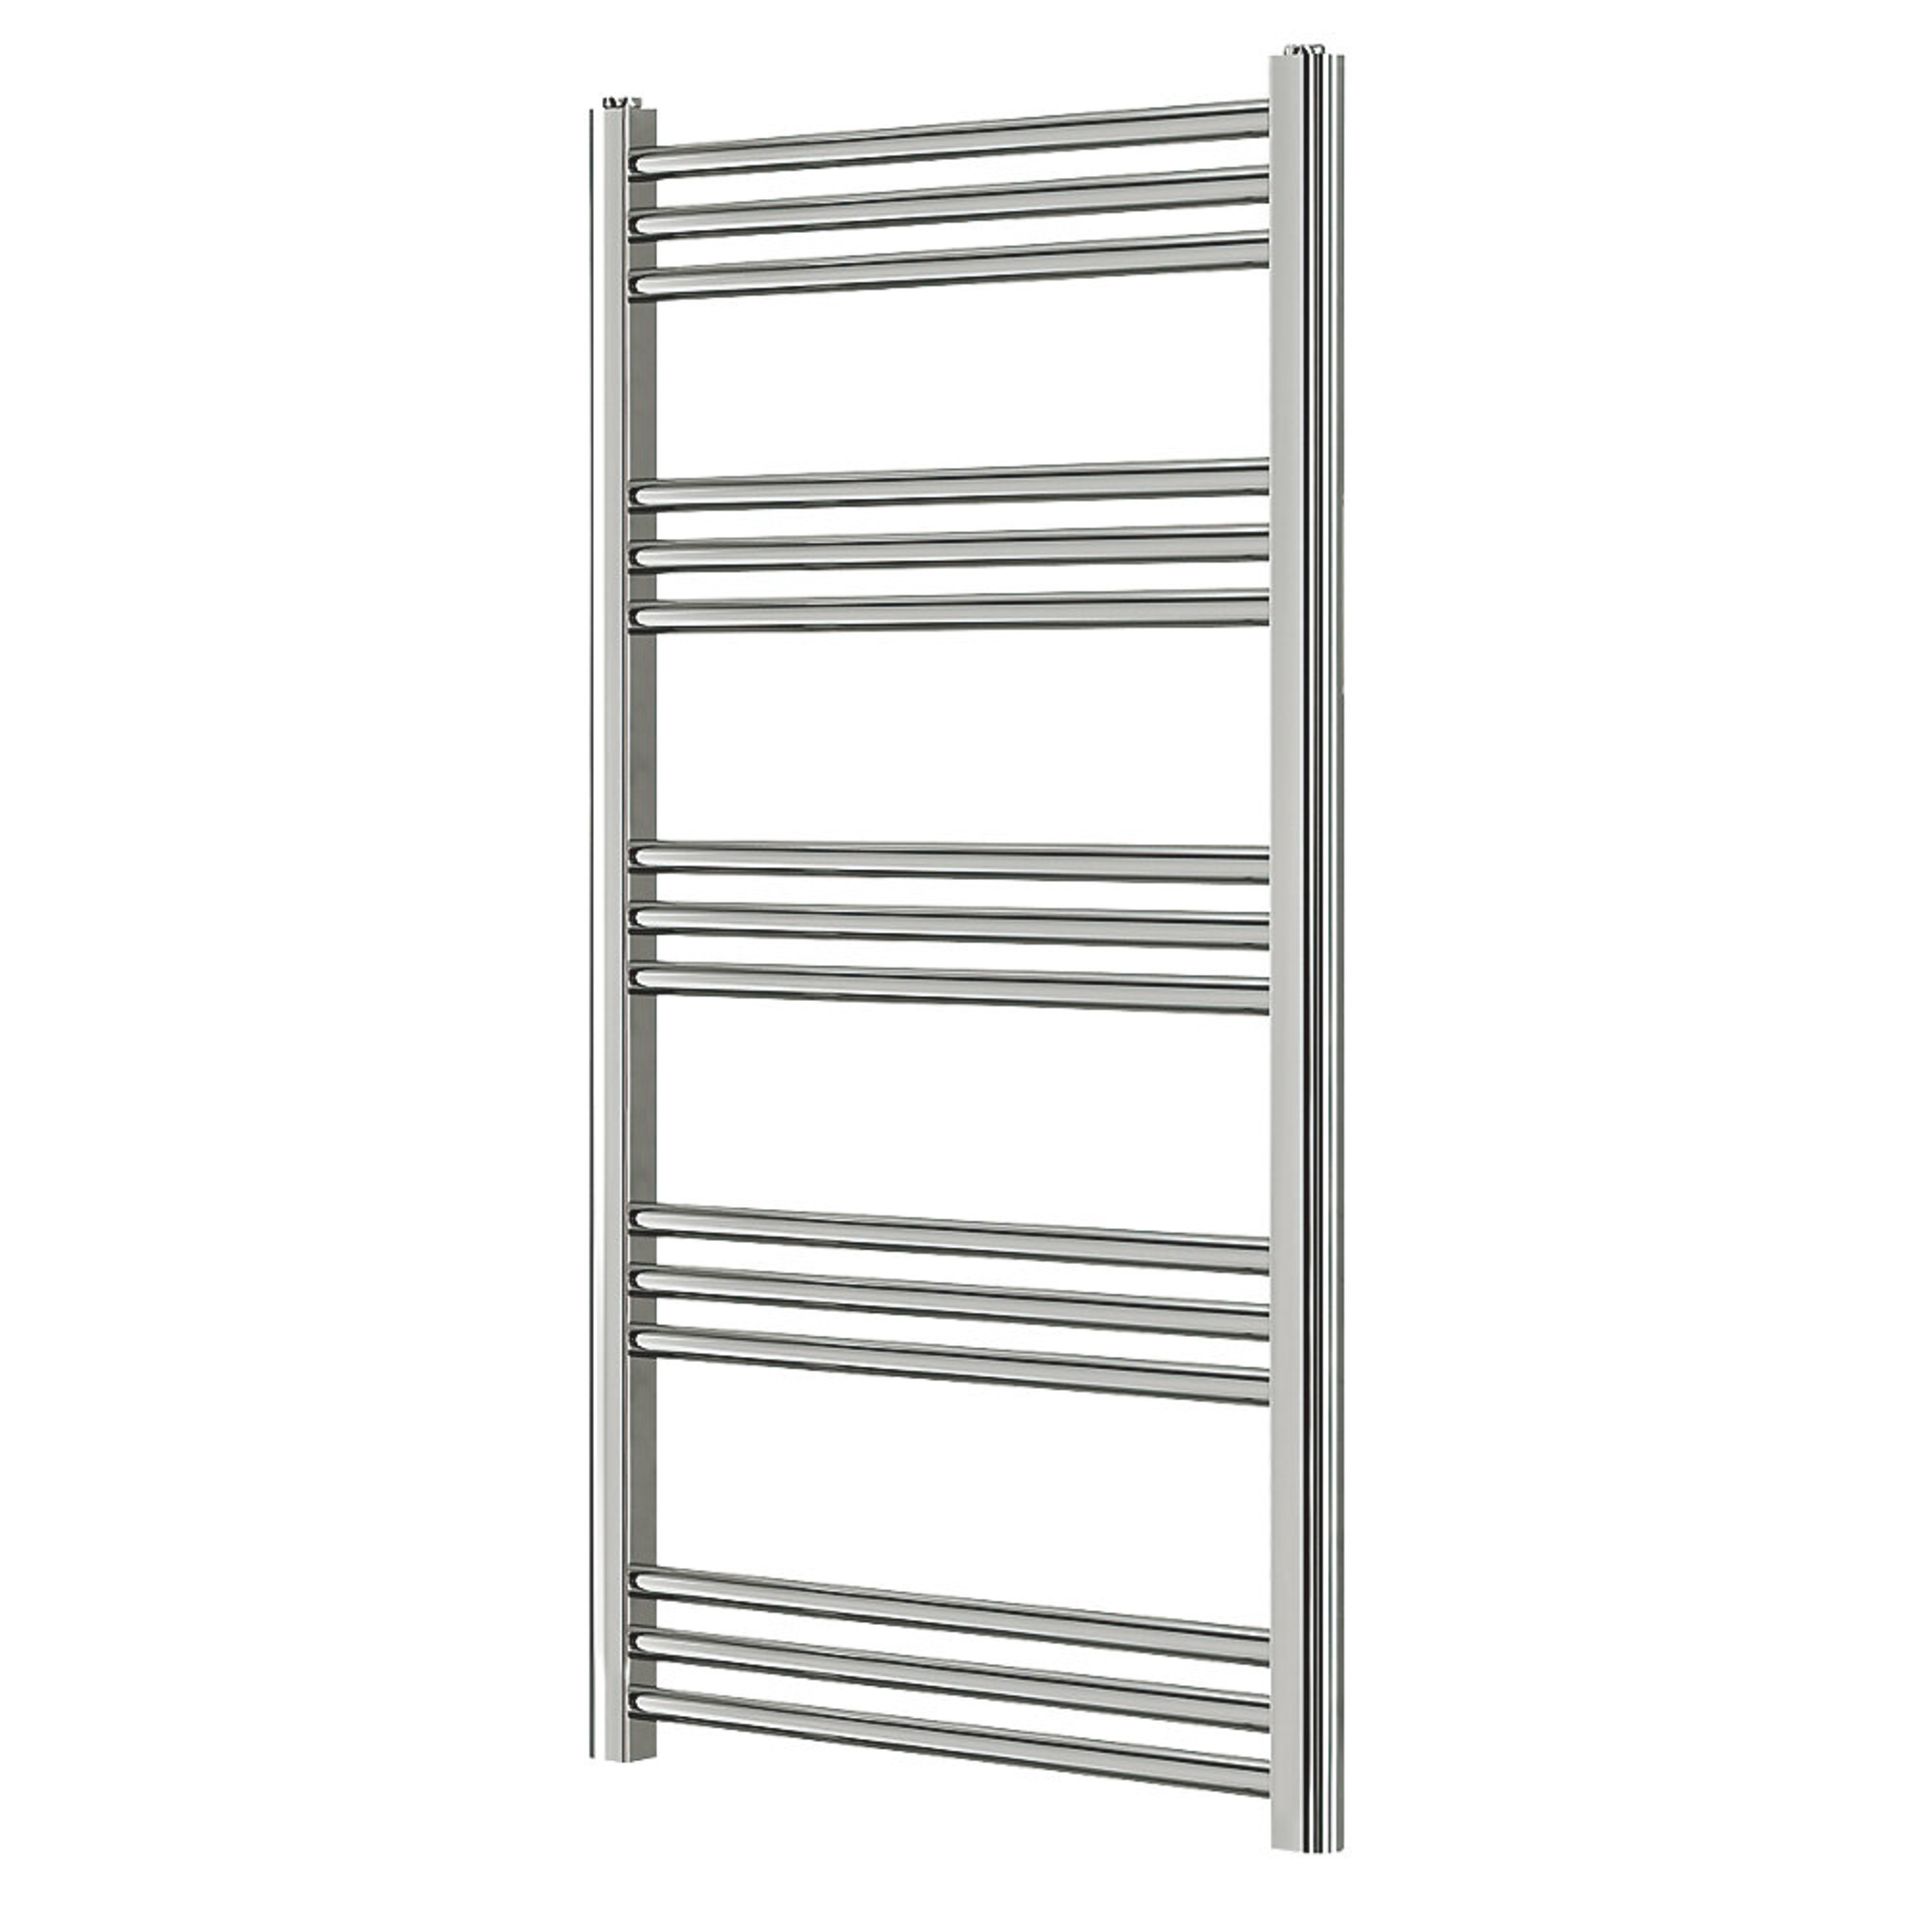 (KL108) 1100 X 500mm Chrome Towel Warmer. Gloss Mild Steel Construction Suitable for Domestic - Image 2 of 2